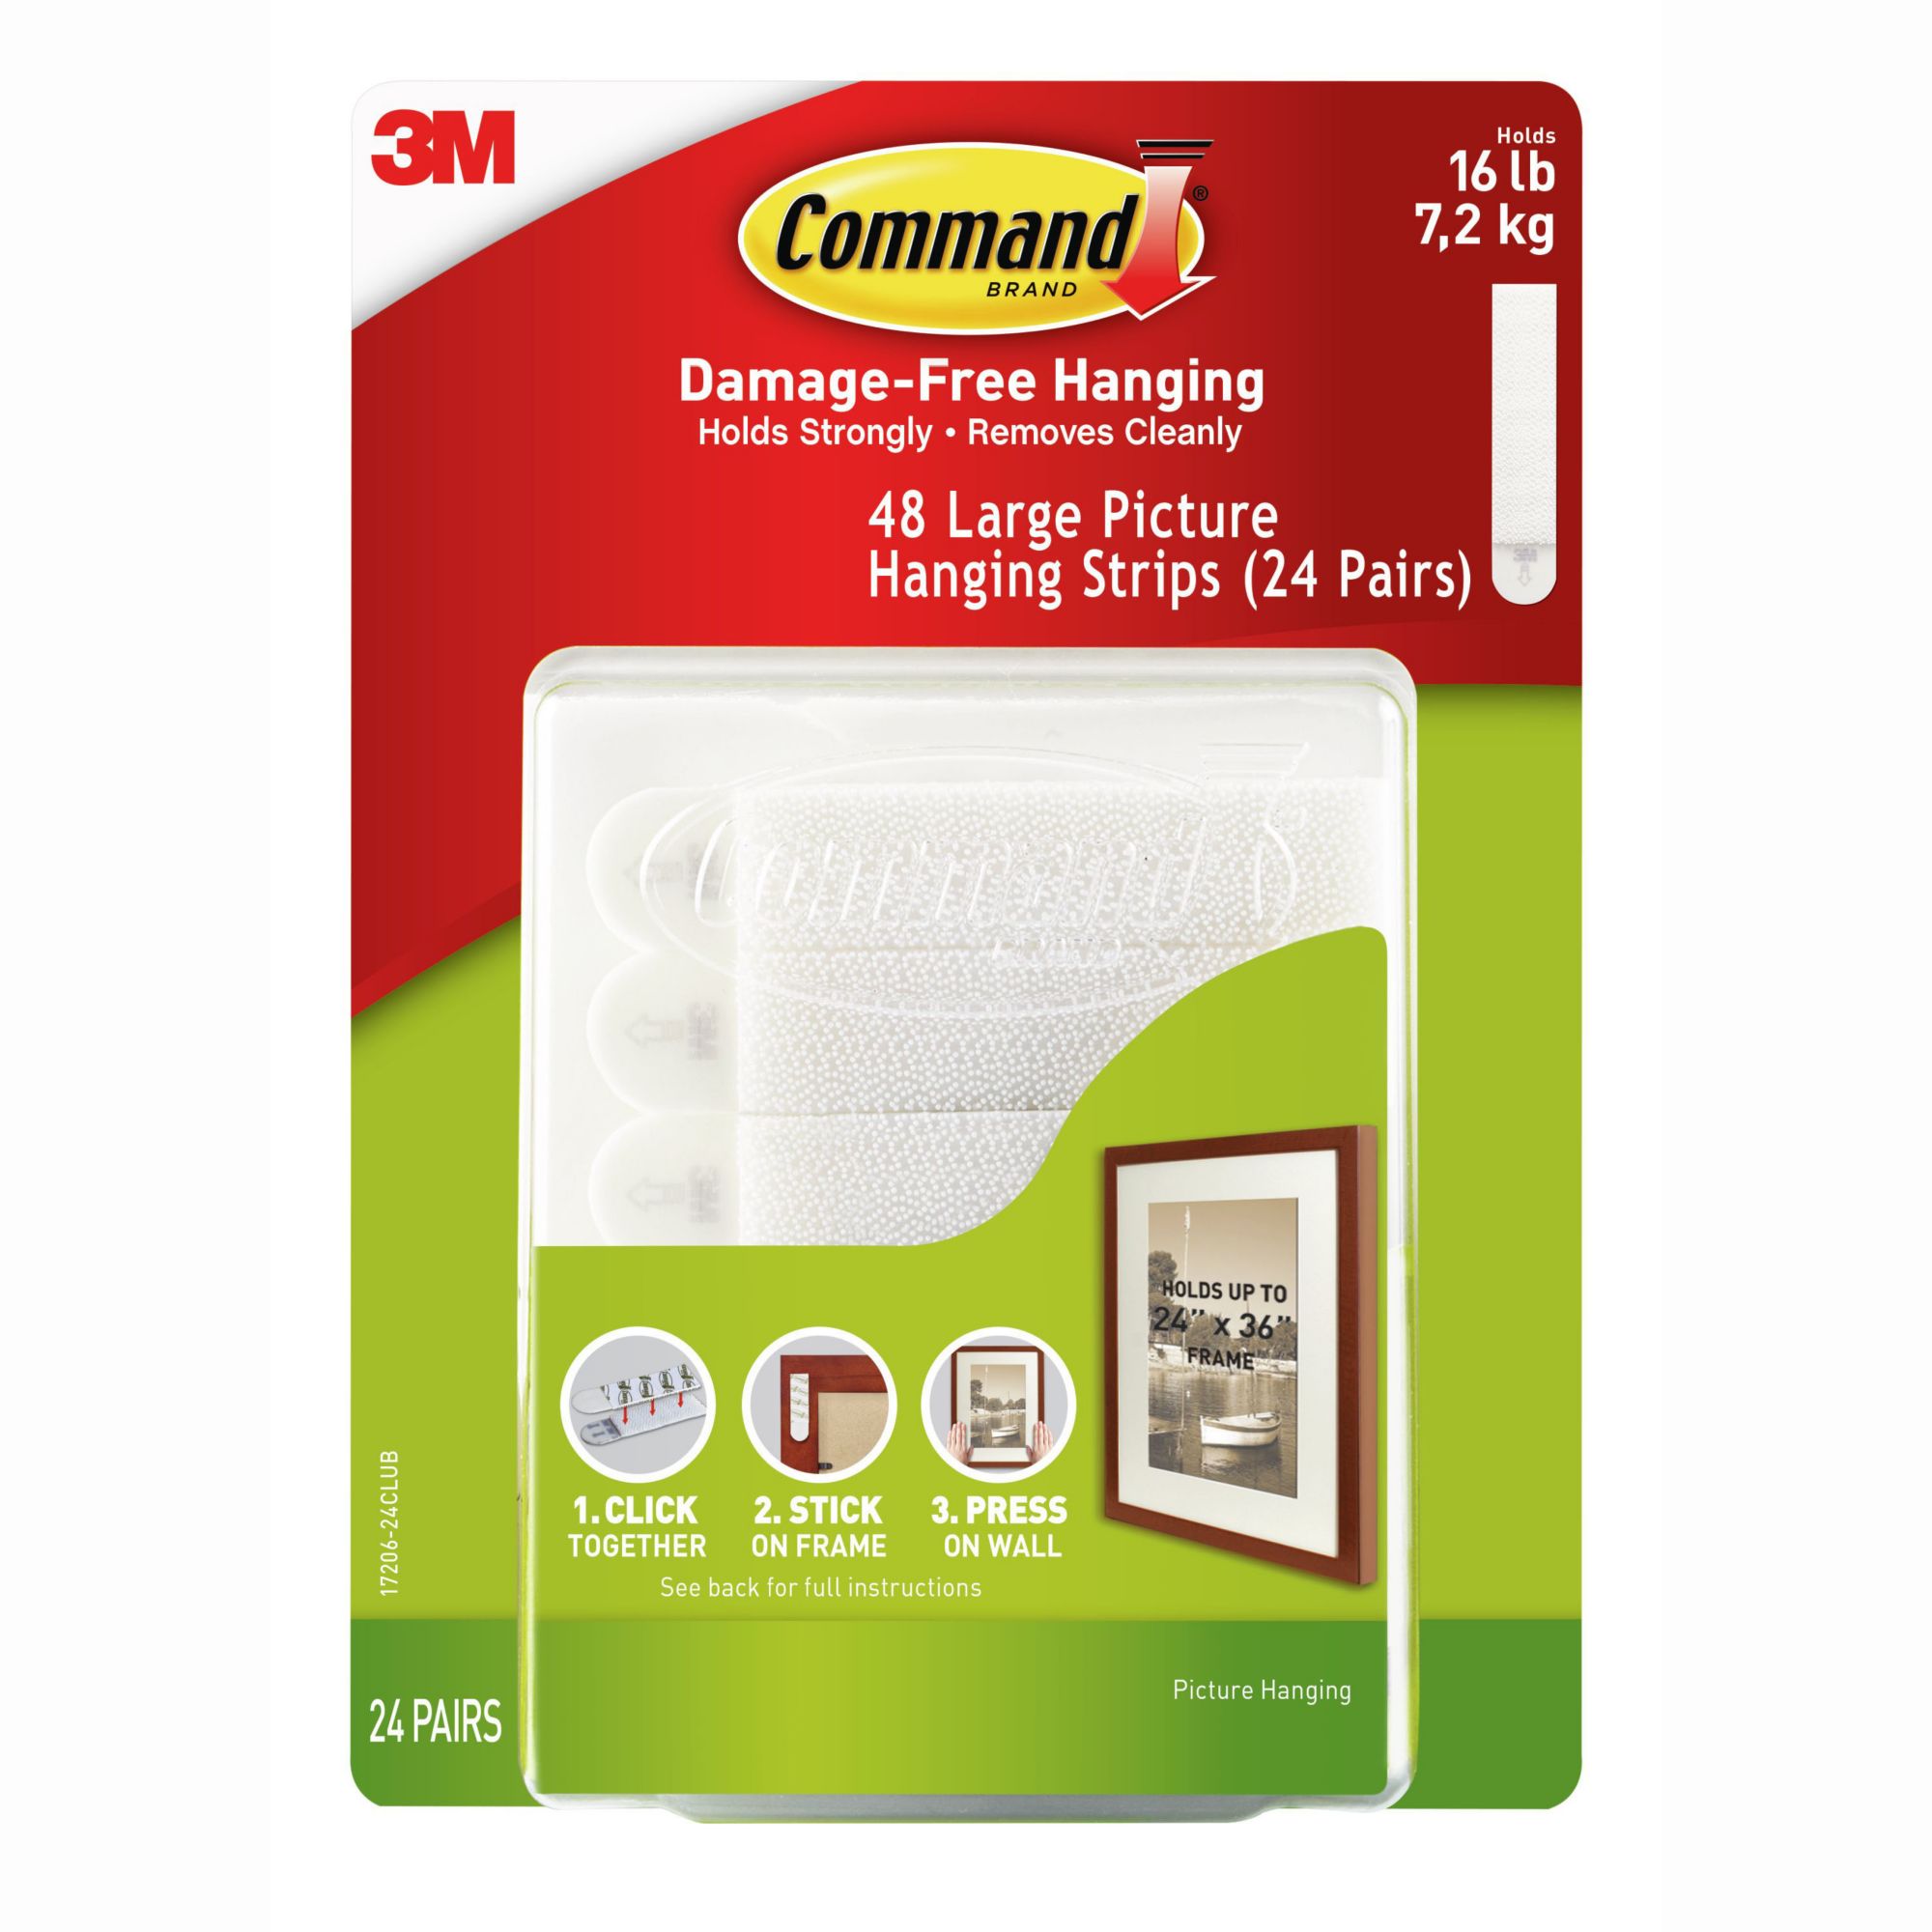 MMBM 1368 Rolls - 2 Mil - White Colored Packing Sealing Tape Convenient,  Product Coding, Dating Inventory, White, 2 x 110 Yards, 3 Core 